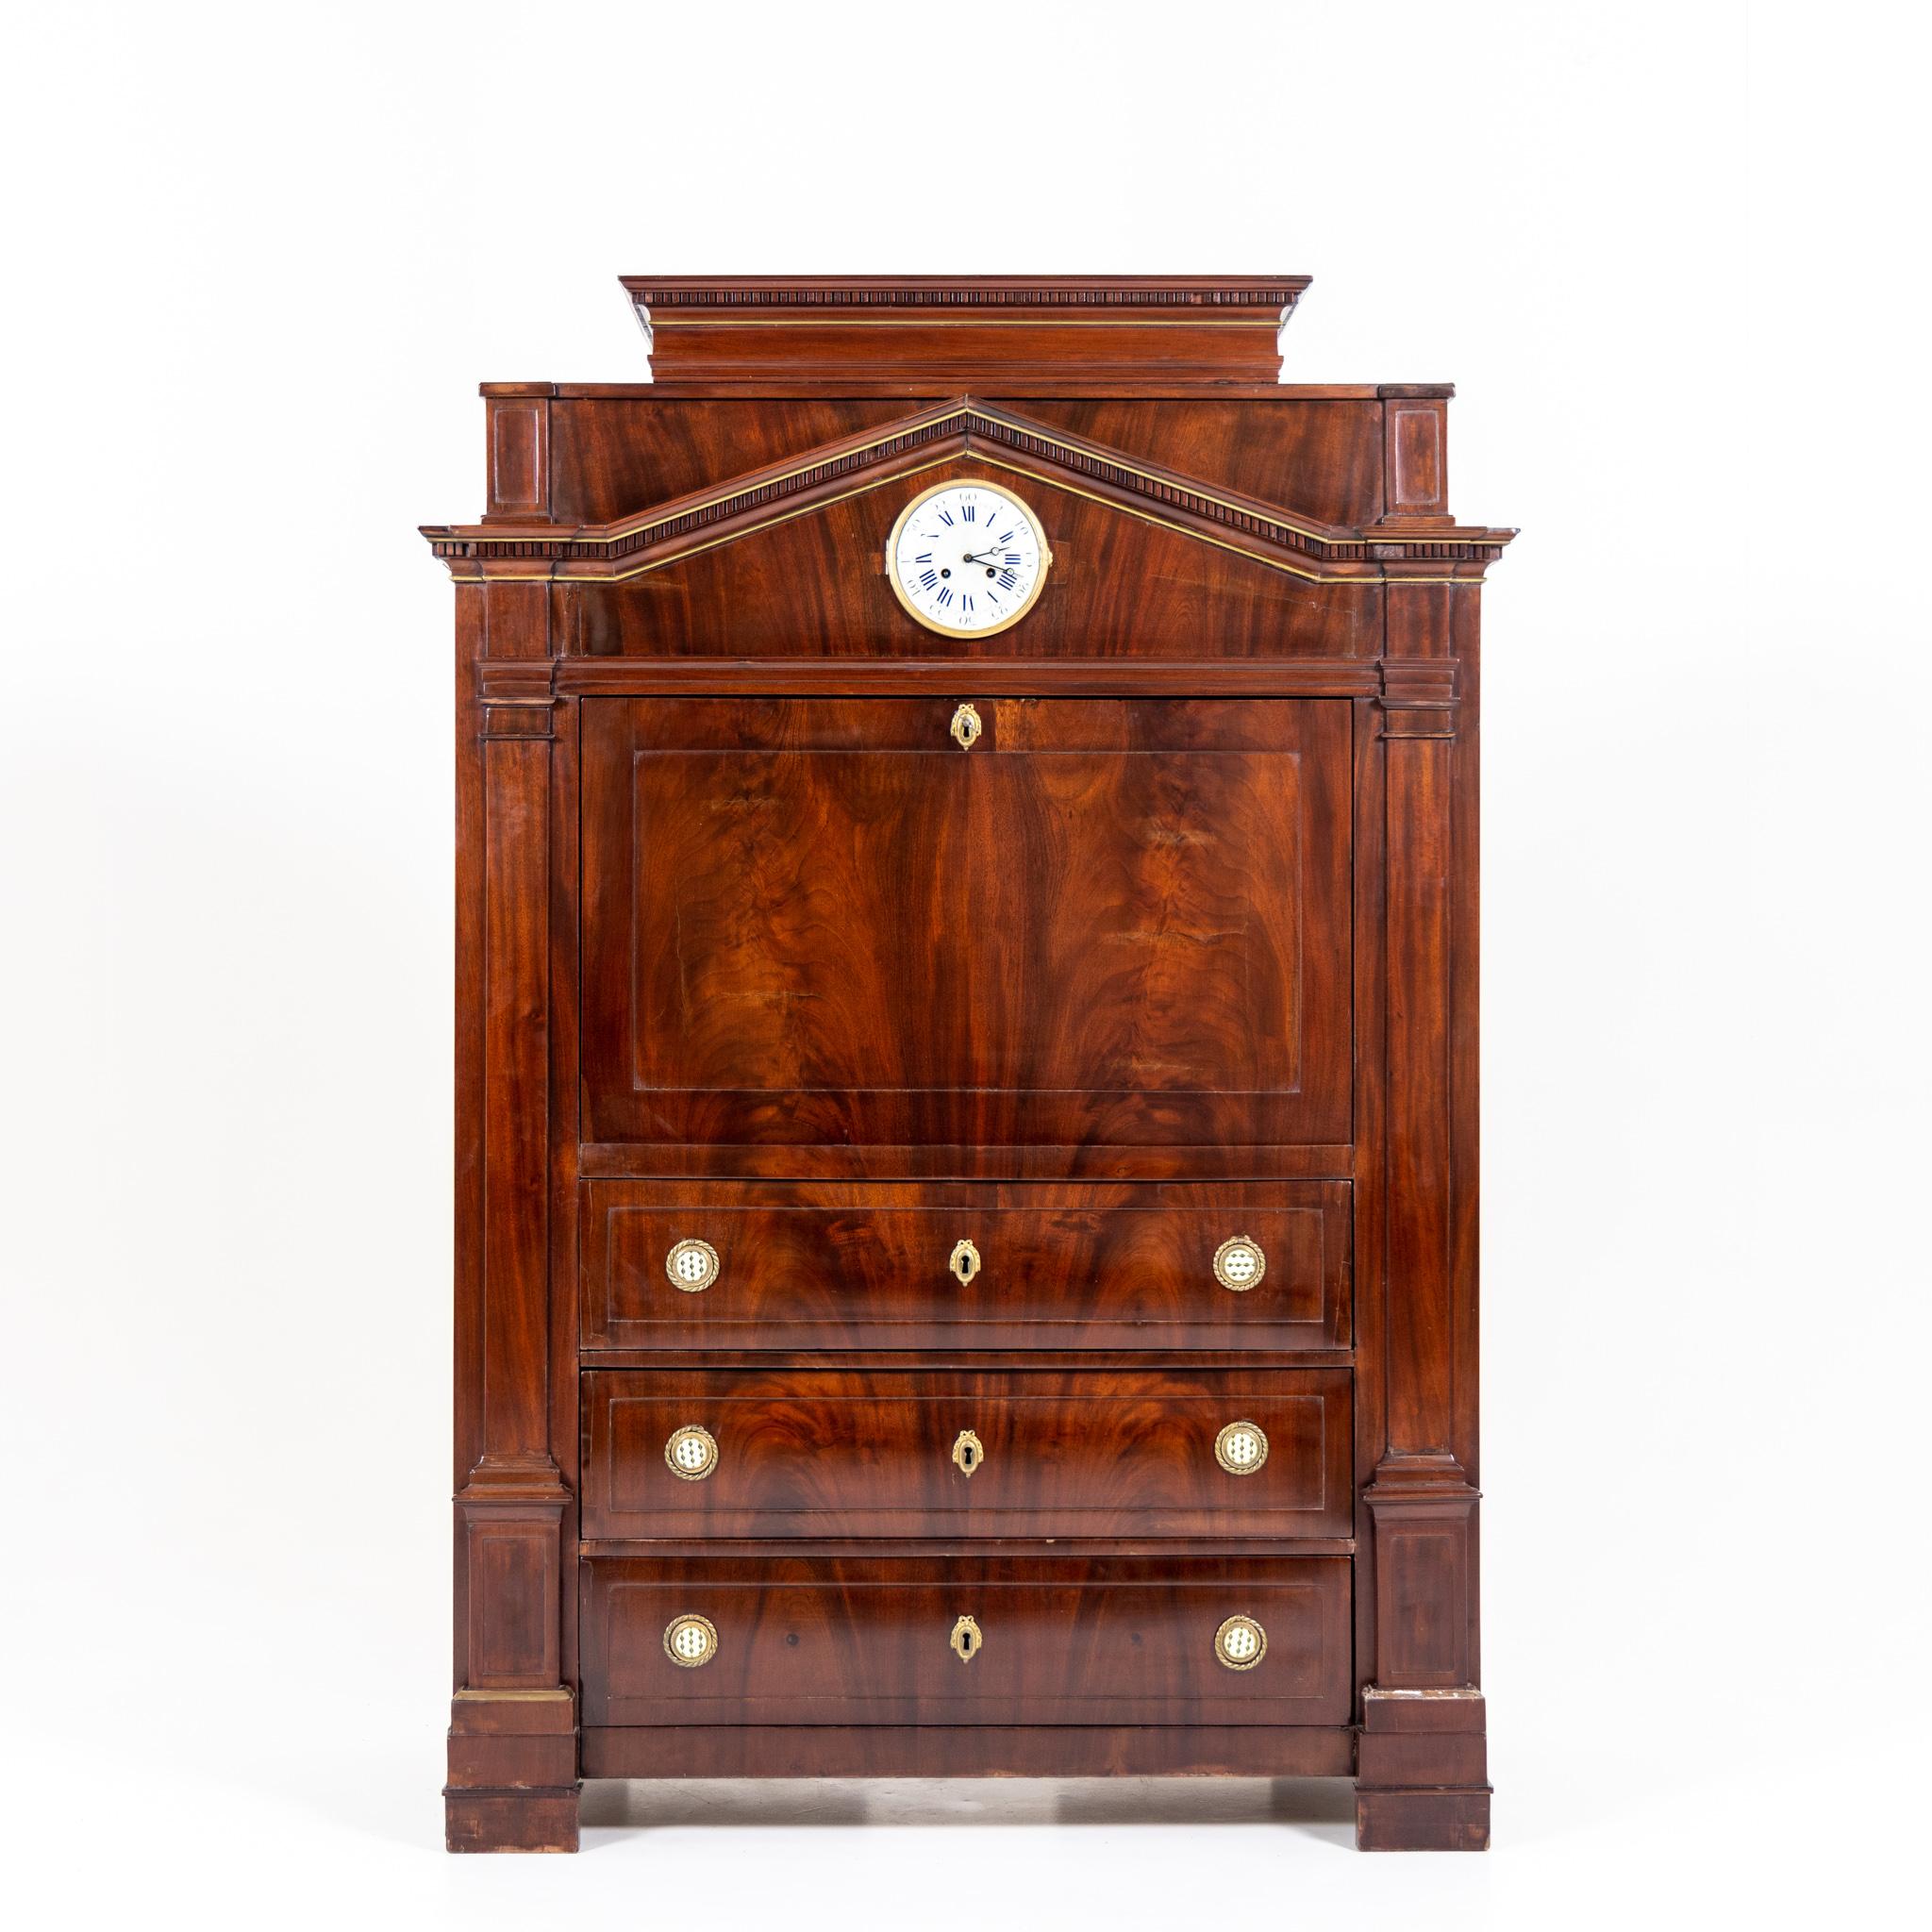 German Neoclassiacal Mahogany Secretaire with Clock, Probably Berlin around 1800 For Sale